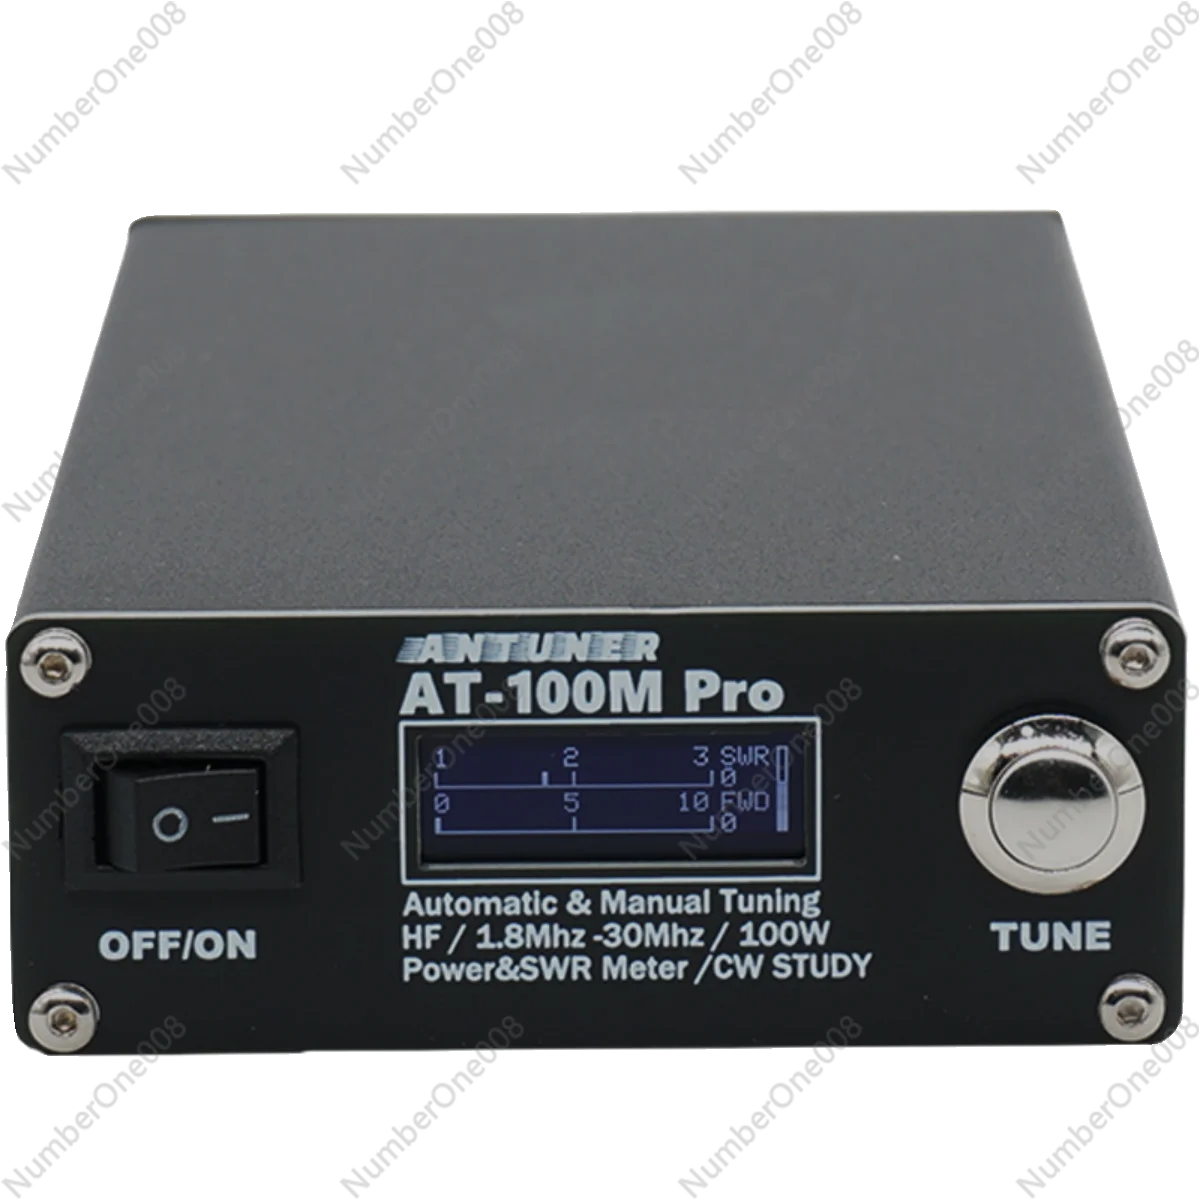 

AT-100M Pro AT-100MPro 100W 1.8MHz-30MHz Universal Antenna Tuner Morse Code CW study SWR Meter Power Meter